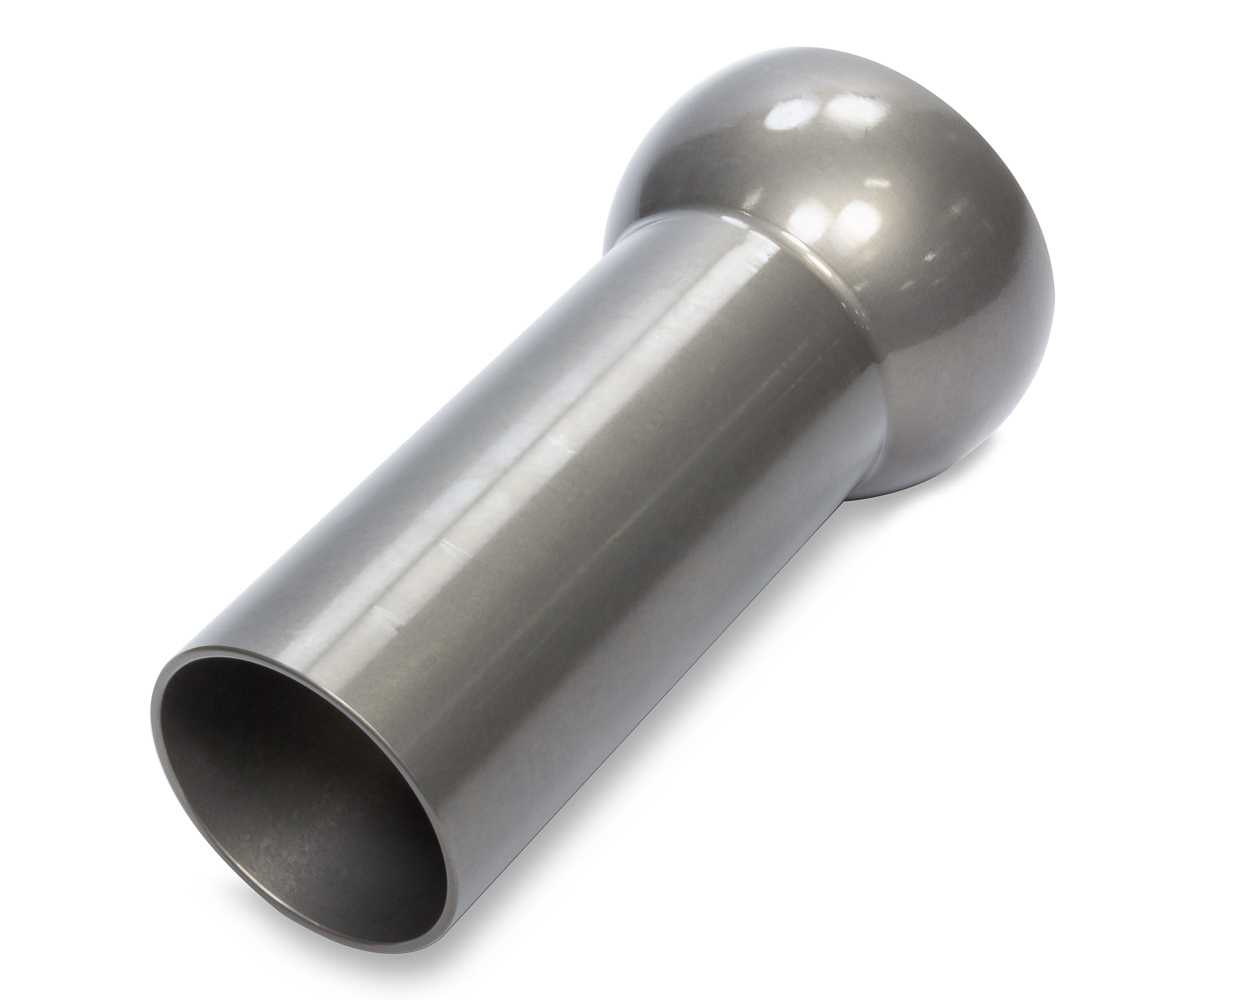 Torque Ball For Steel Housing Only